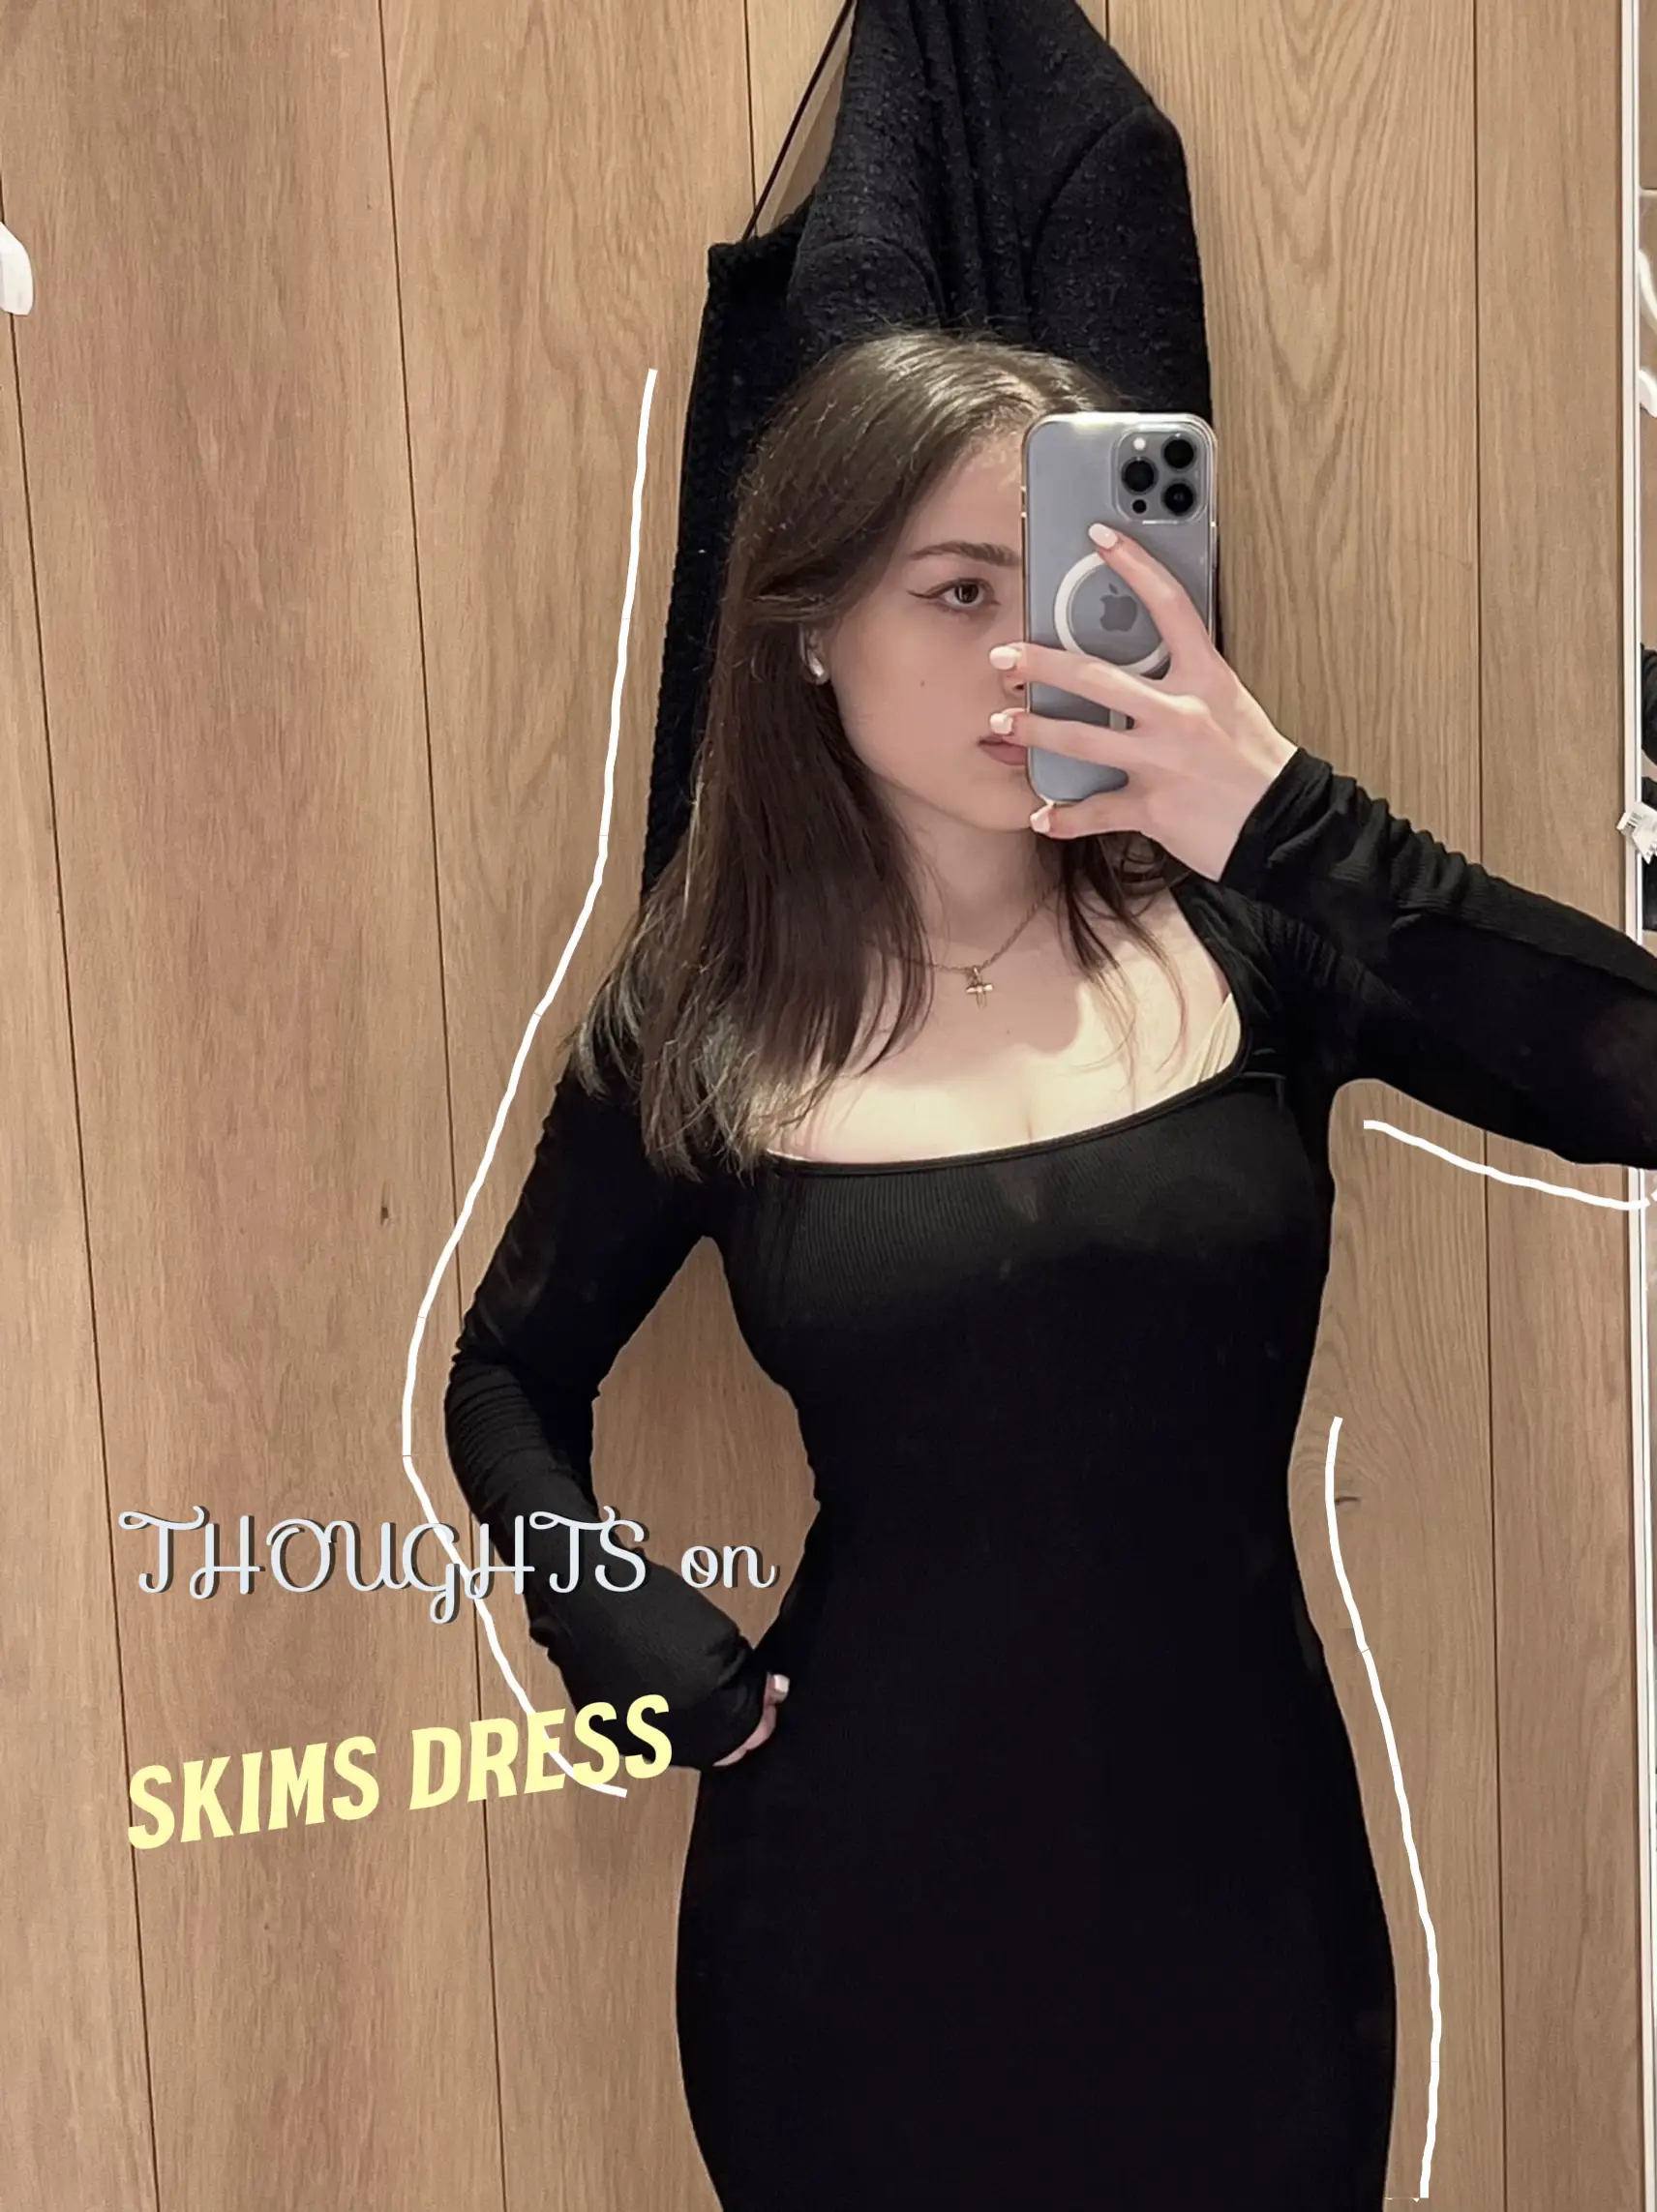 THOUGHTS on SKIMS DRESS ✨, Gallery posted by ♡Natty